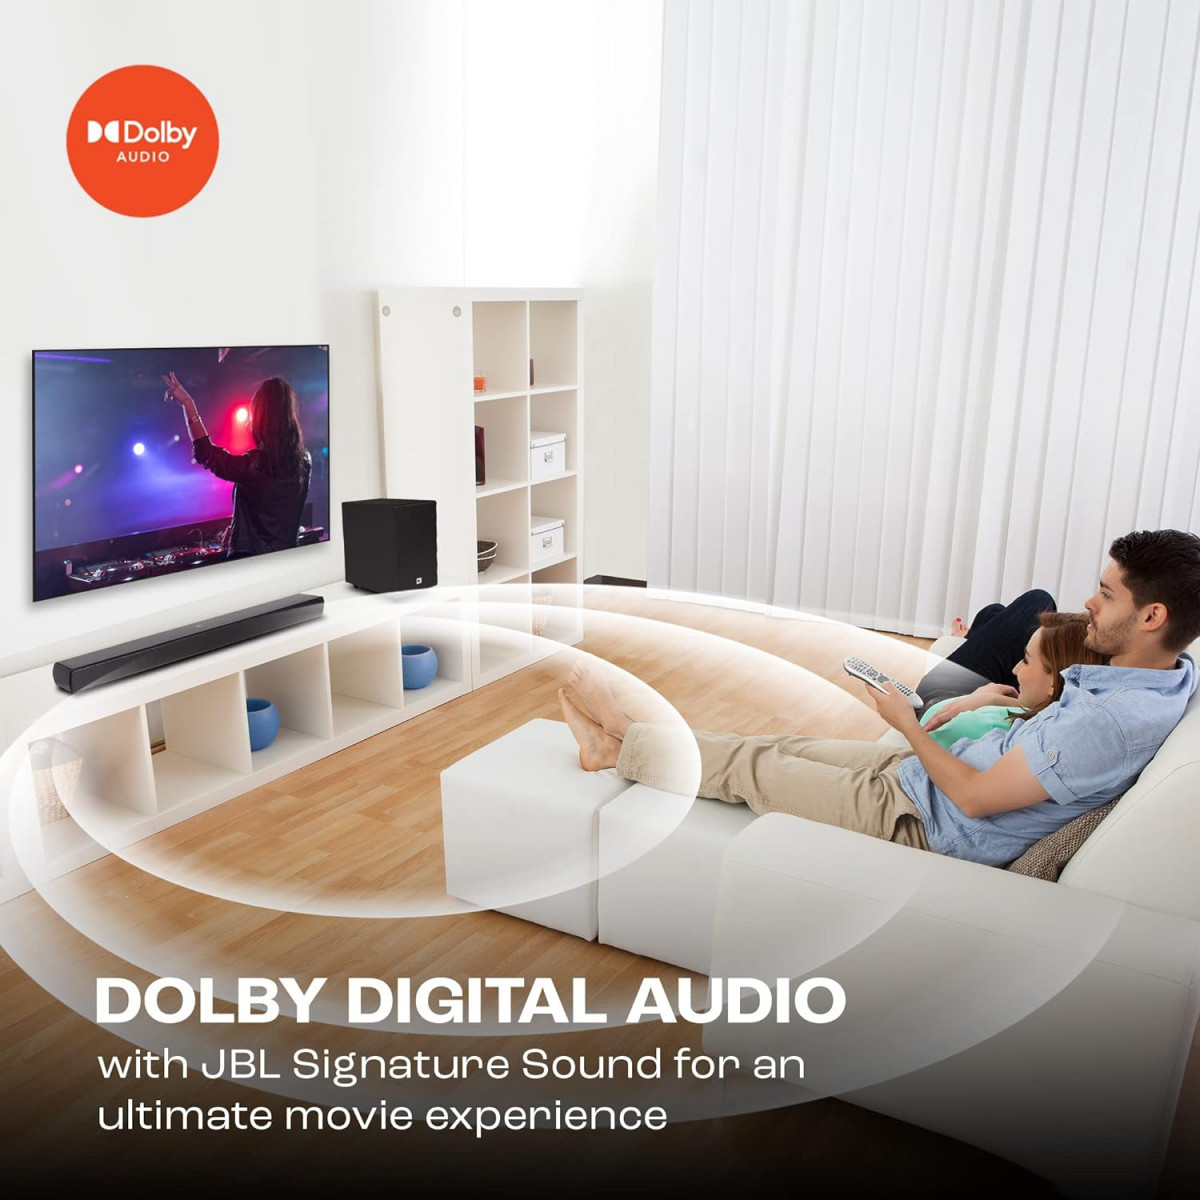 JBL Cinema SB241 Dolby Digital Soundbar with Wired Subwoofer for Extra Deep Bass 21 Channel Home Theatre with Remote HDMI ARC Bluetooth  Optical Connectivity 110W